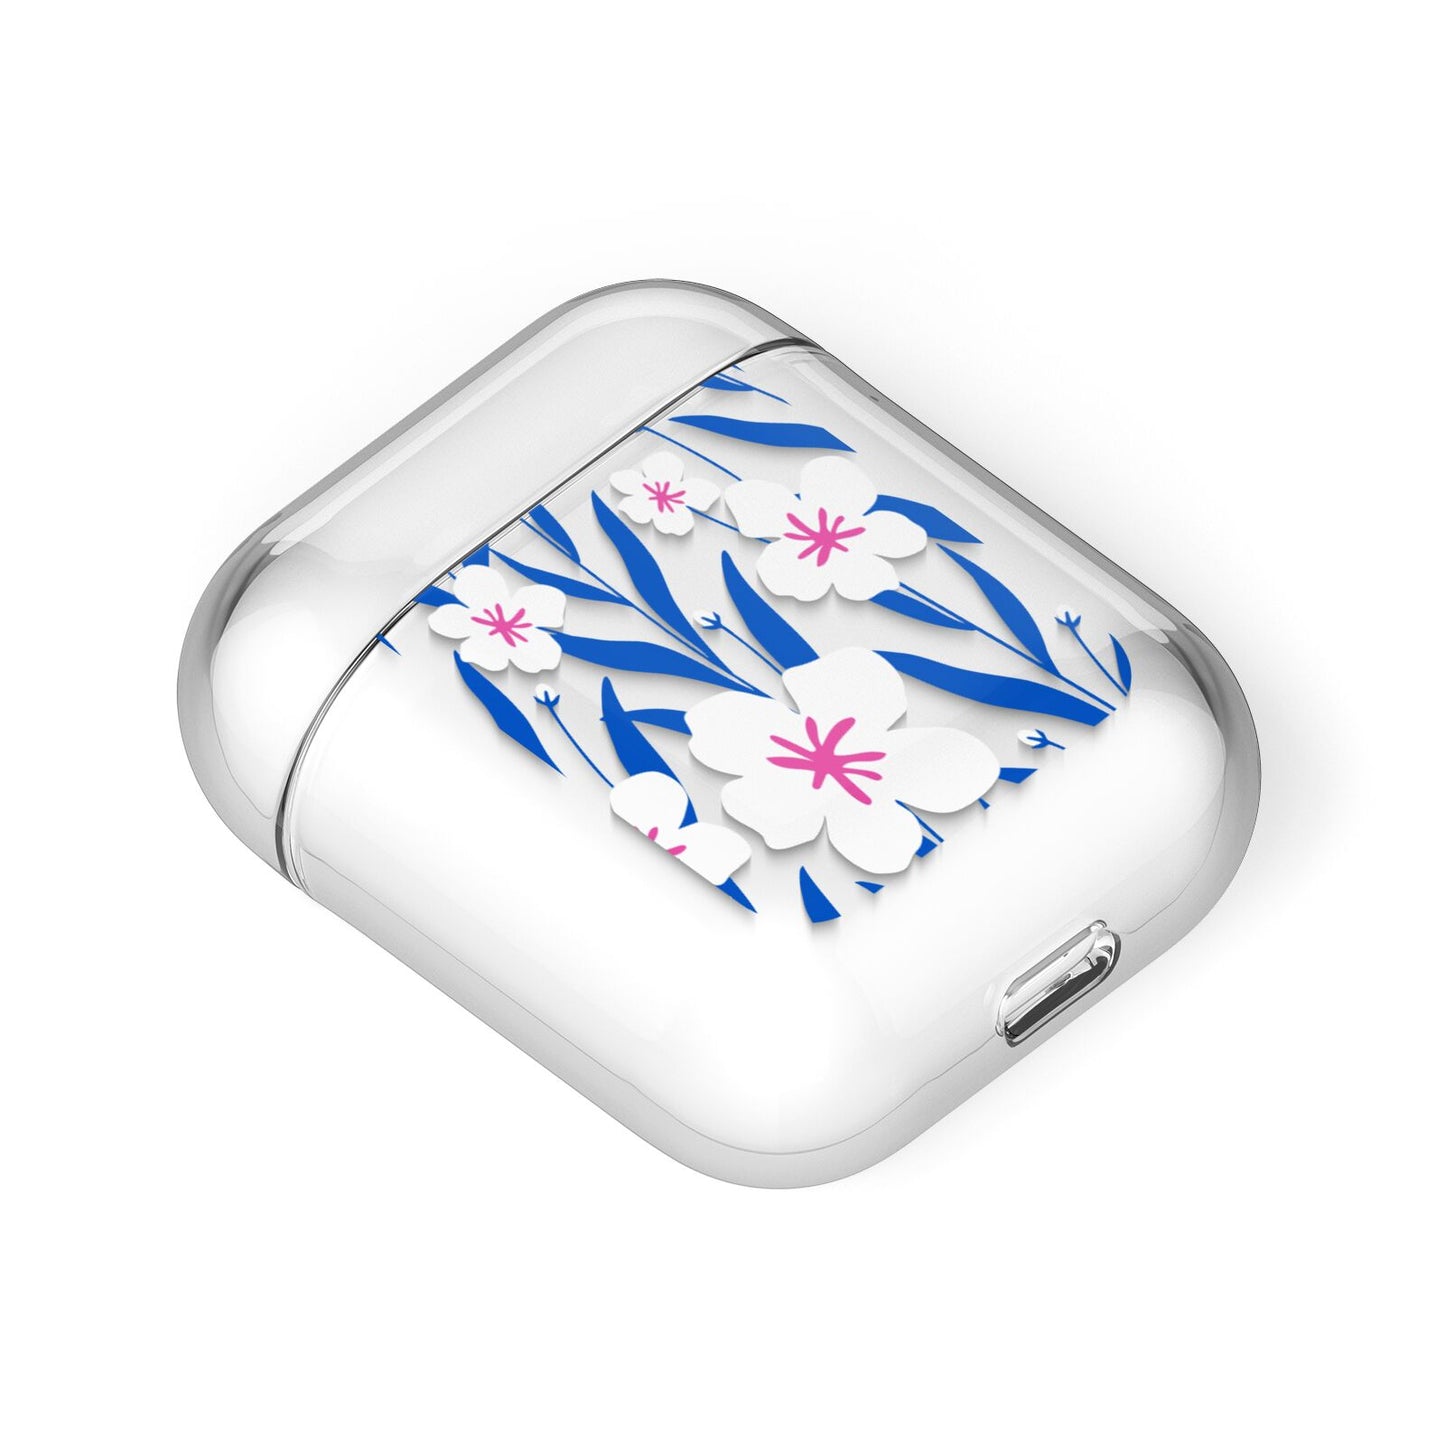 Blue and White Flowers AirPods Case Laid Flat